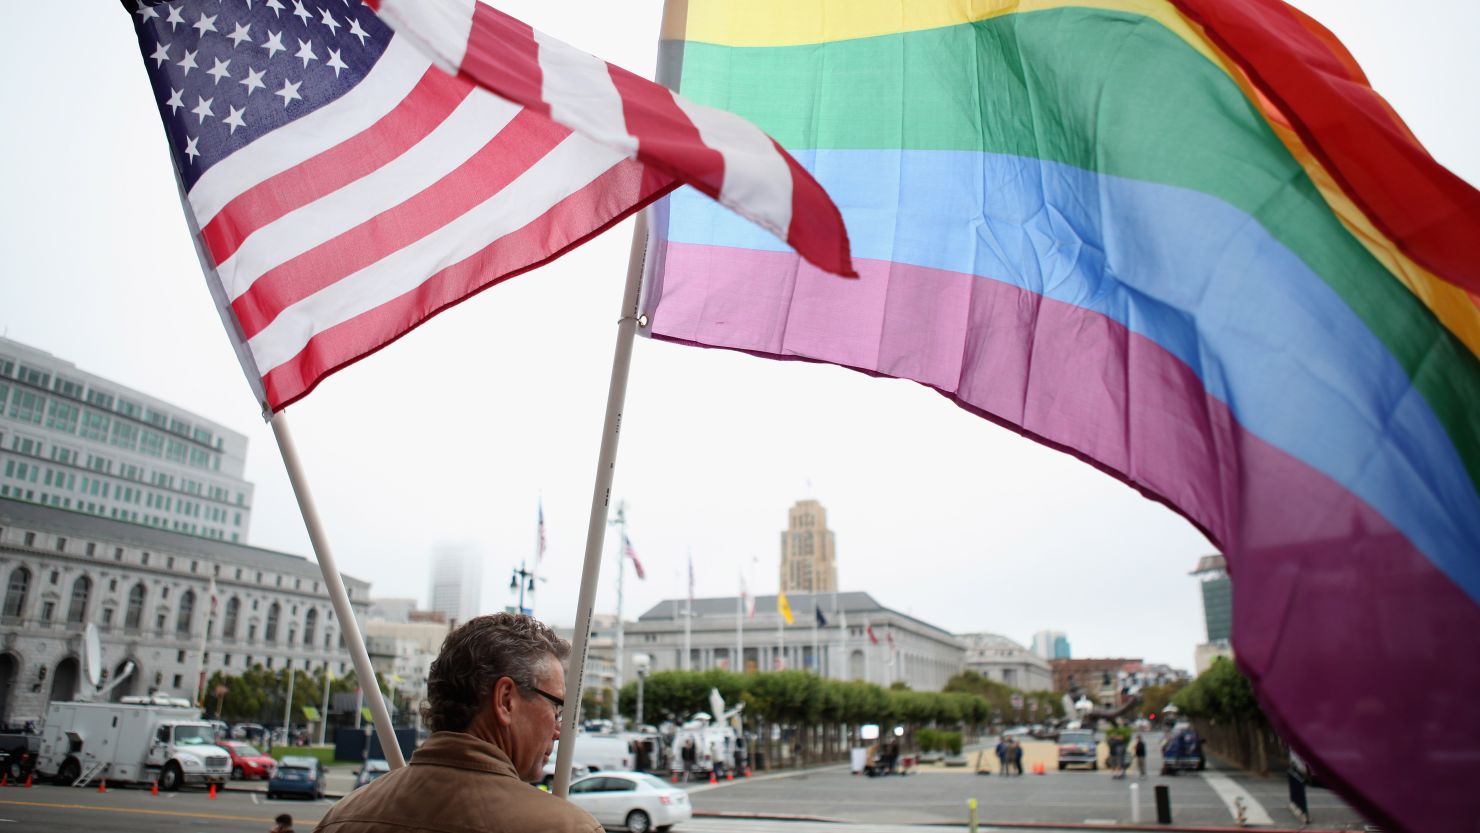 A demonstrator waves American and gay pride flags in San Francisco in 2010. California law bans same-sex marriage.